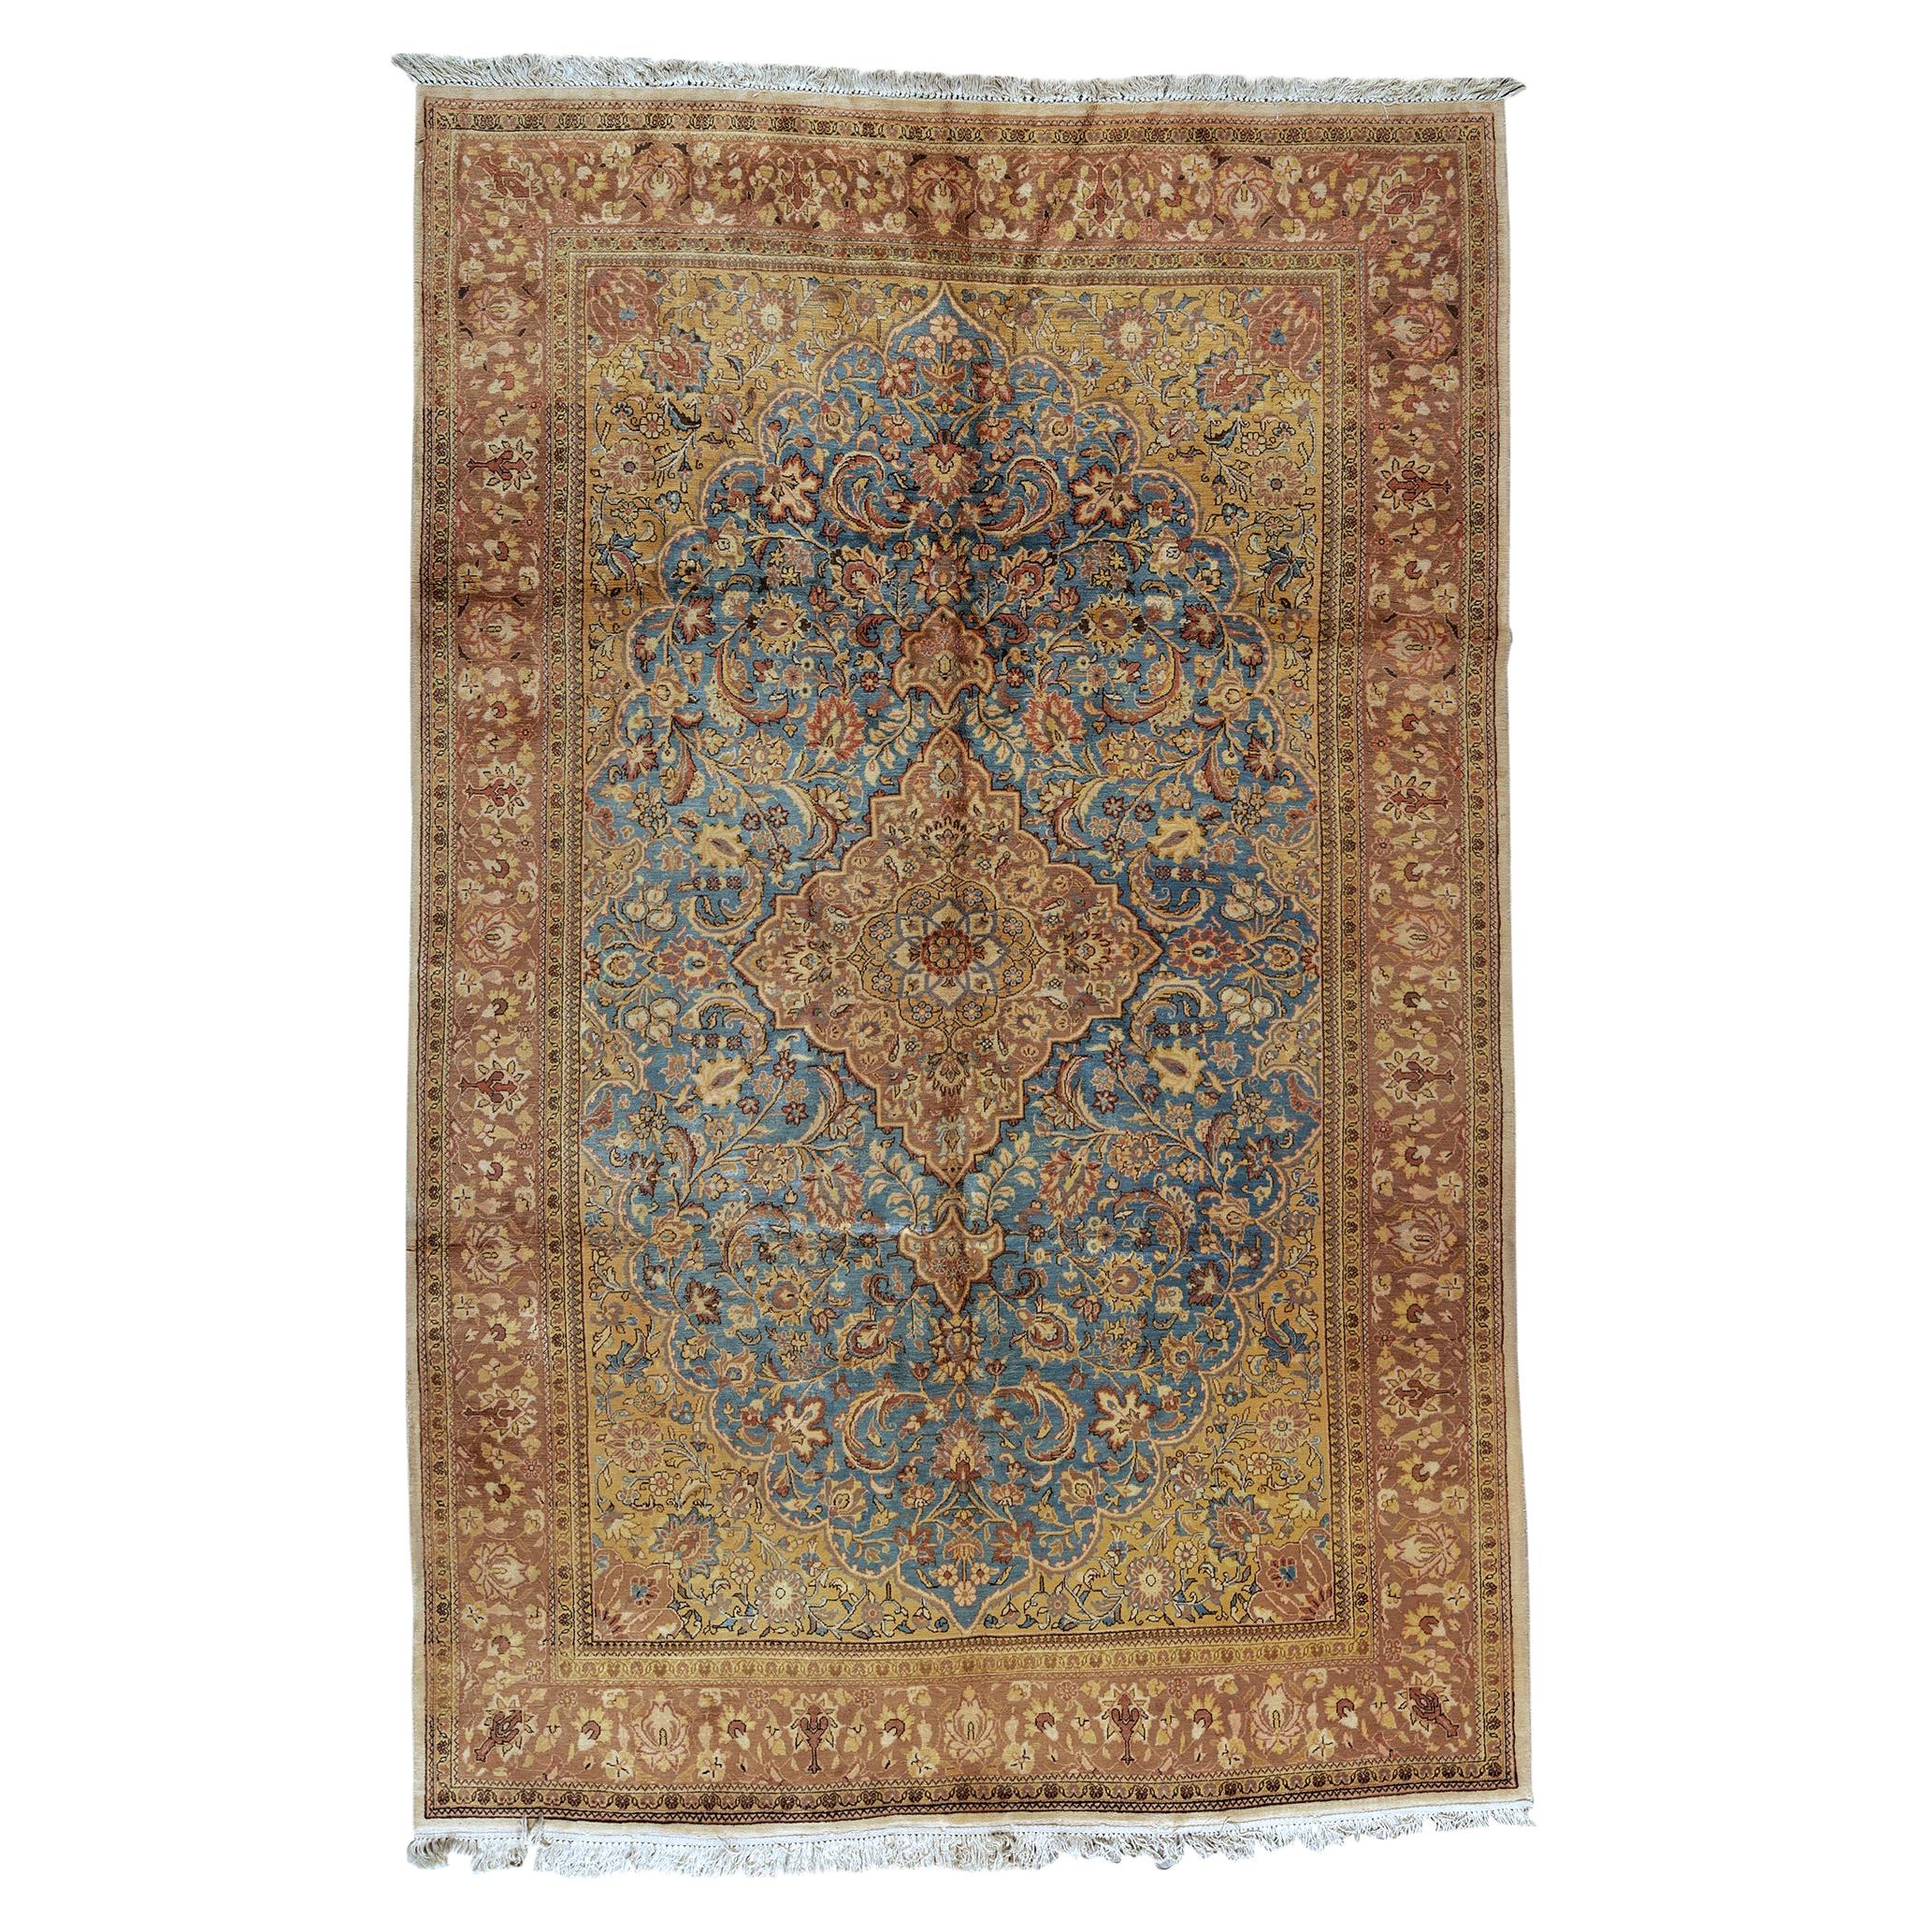  Antique Persian fine Traditional Handwoven Luxury Wool Blue / Gold Rug For Sale